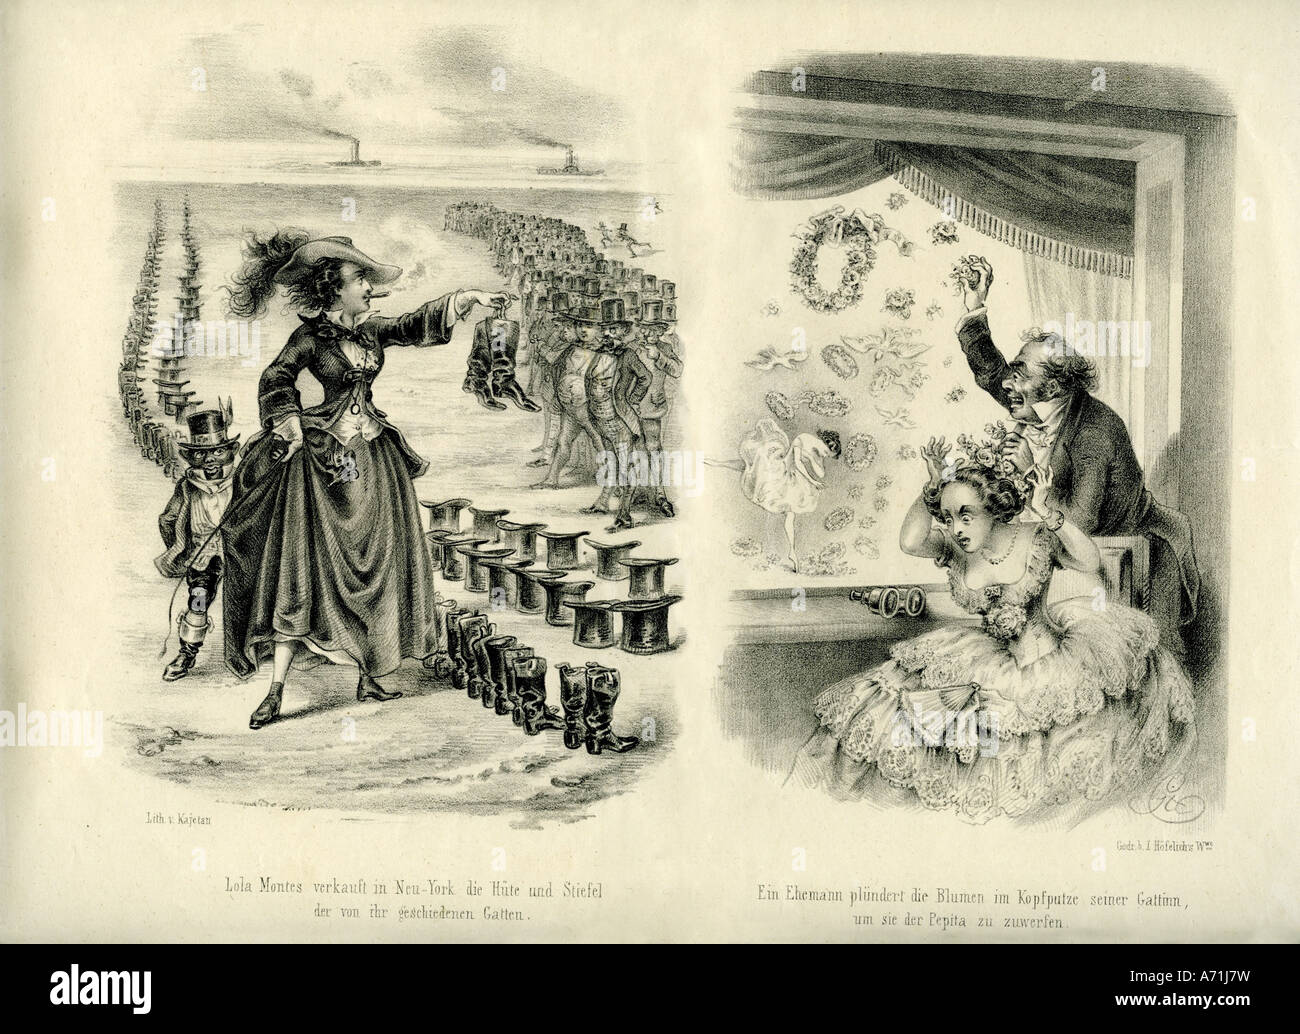 theatre, satire, "Some foolery of the year 1953, Number 1", left: Lola  Montez selling in New York the hats and boots of her divorced husbands,  right: A husband is pillaging the fowers